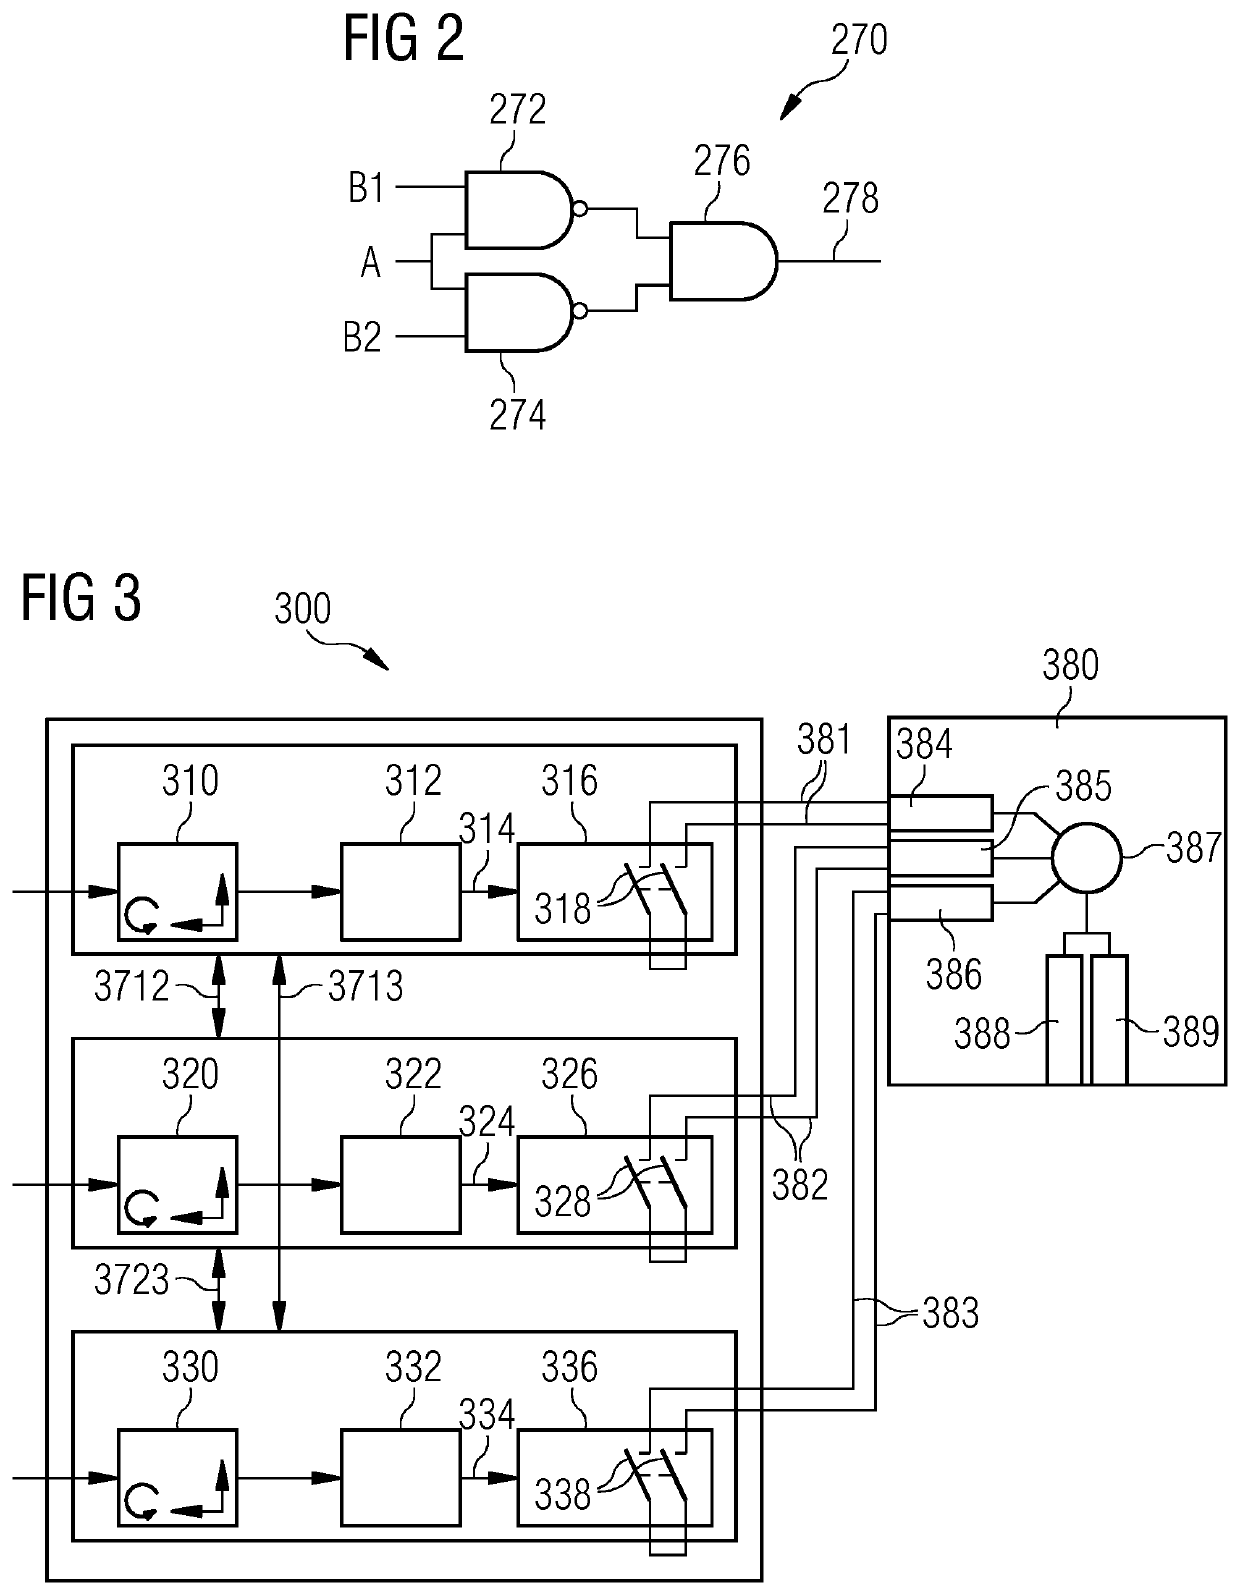 Wind turbine fault monitoring system and method